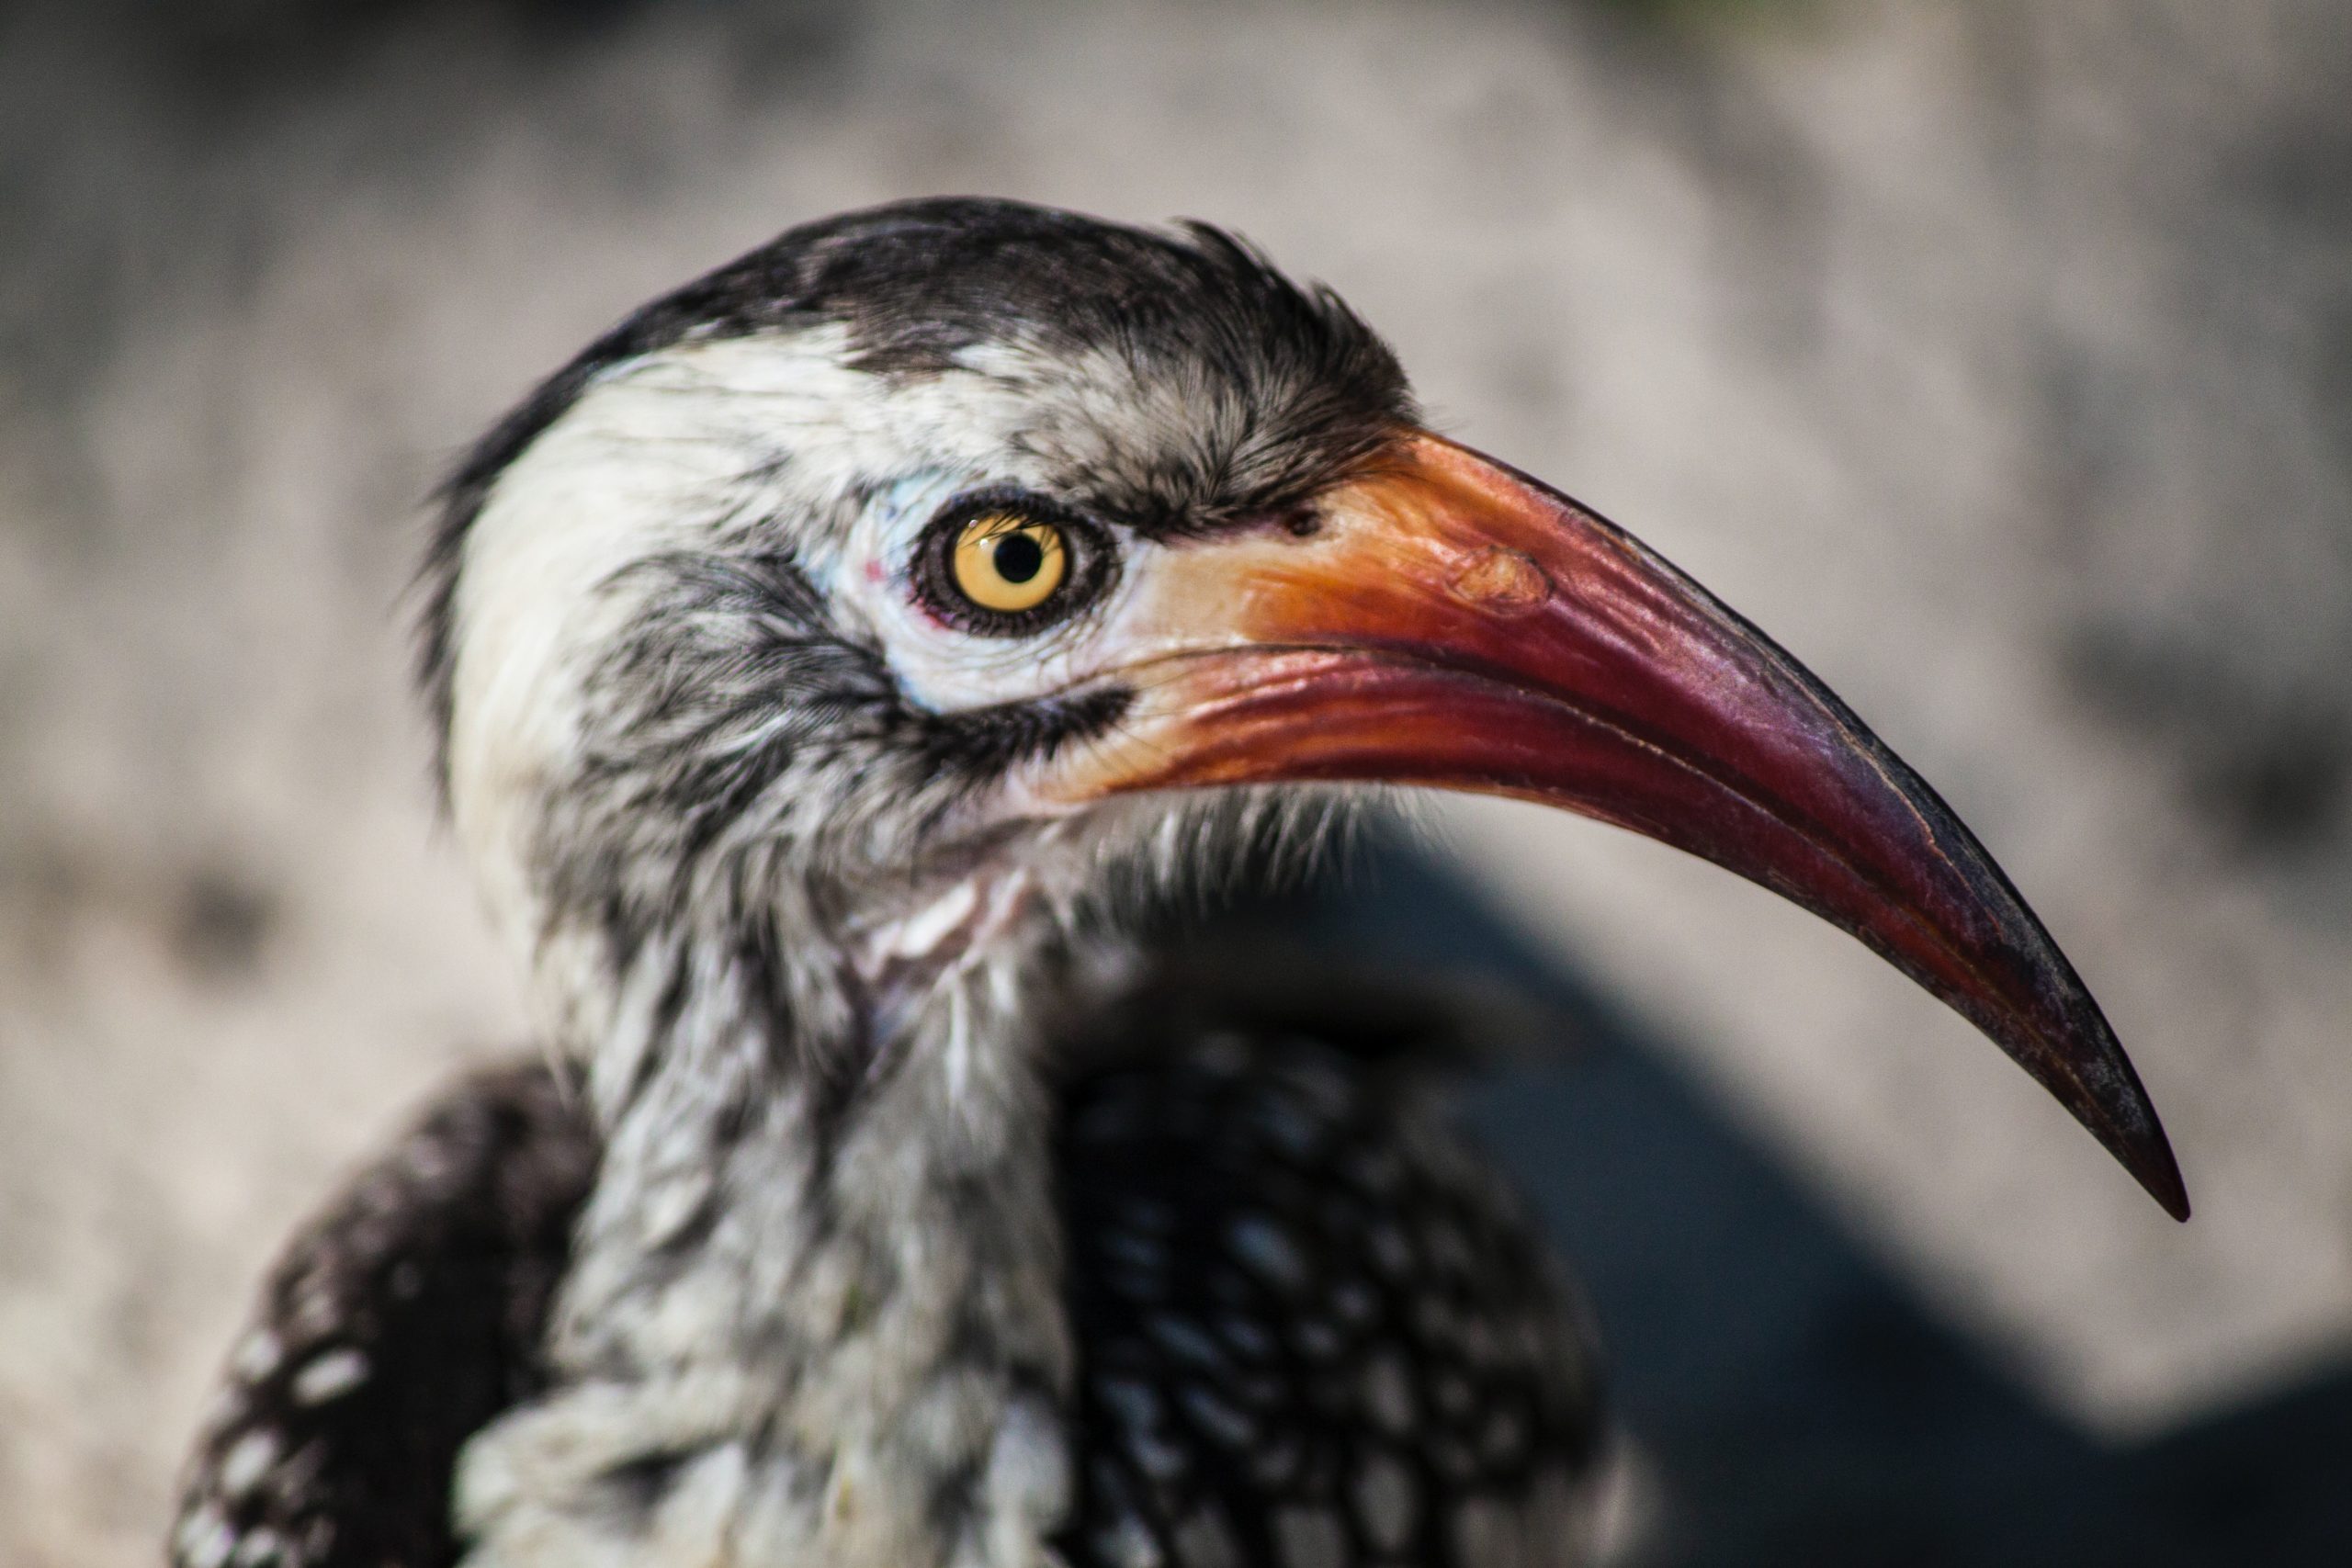 African hornbill ite black and white feathers and red bill